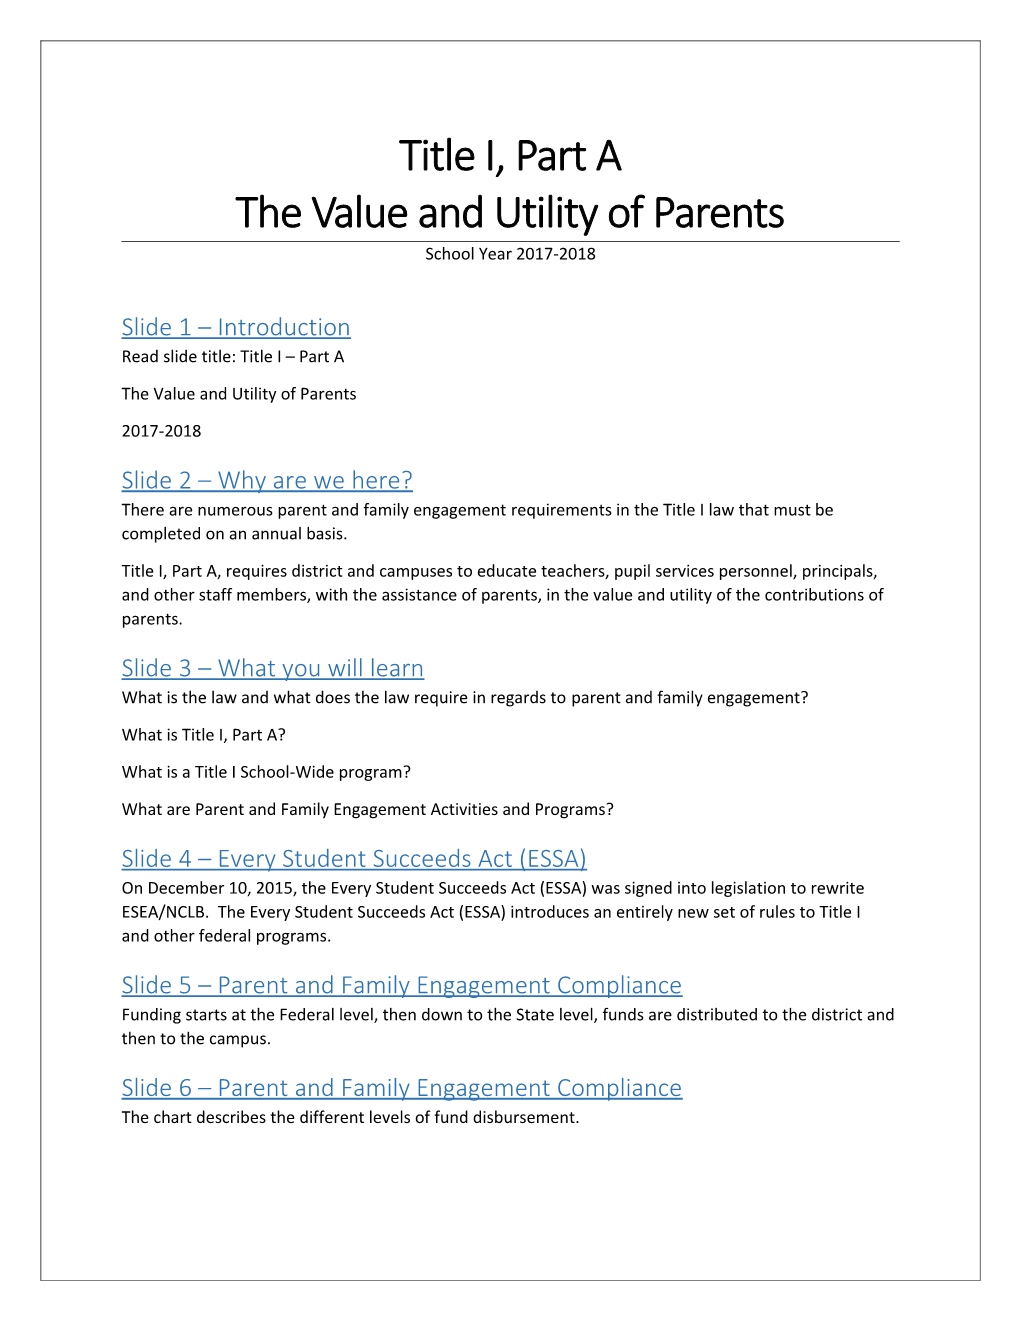 The Value and Utility of Parents